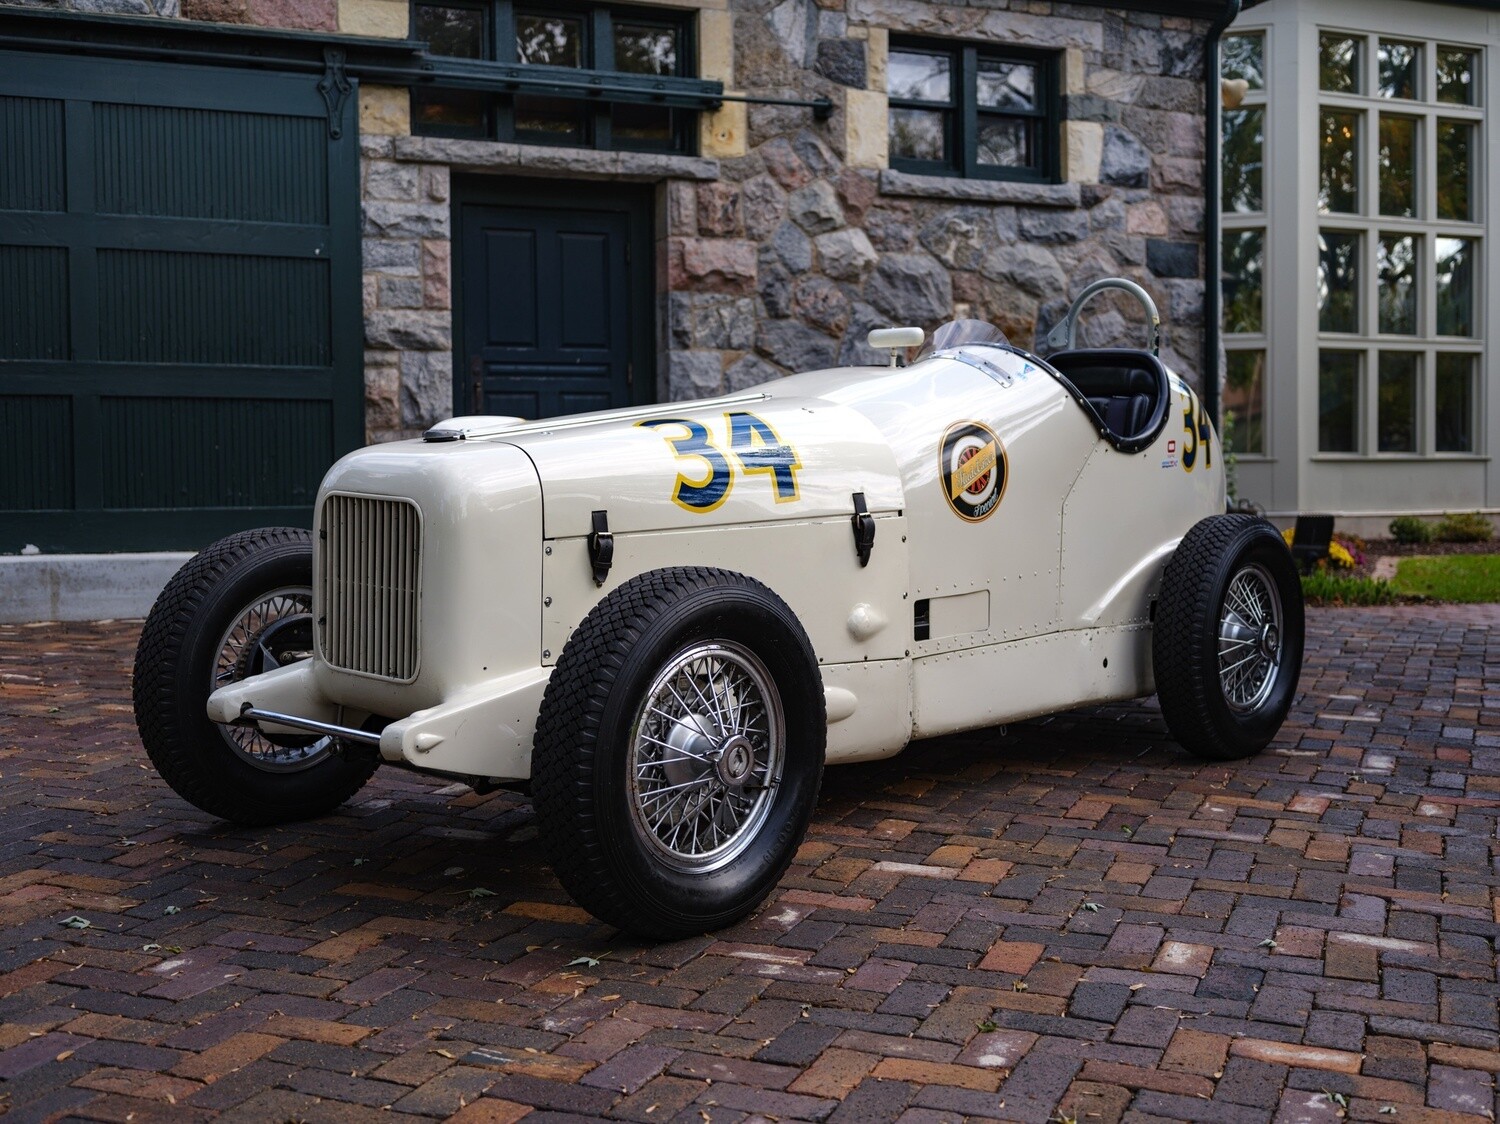 1933 Studebaker Special #34 Indianapolis 500 Race Car